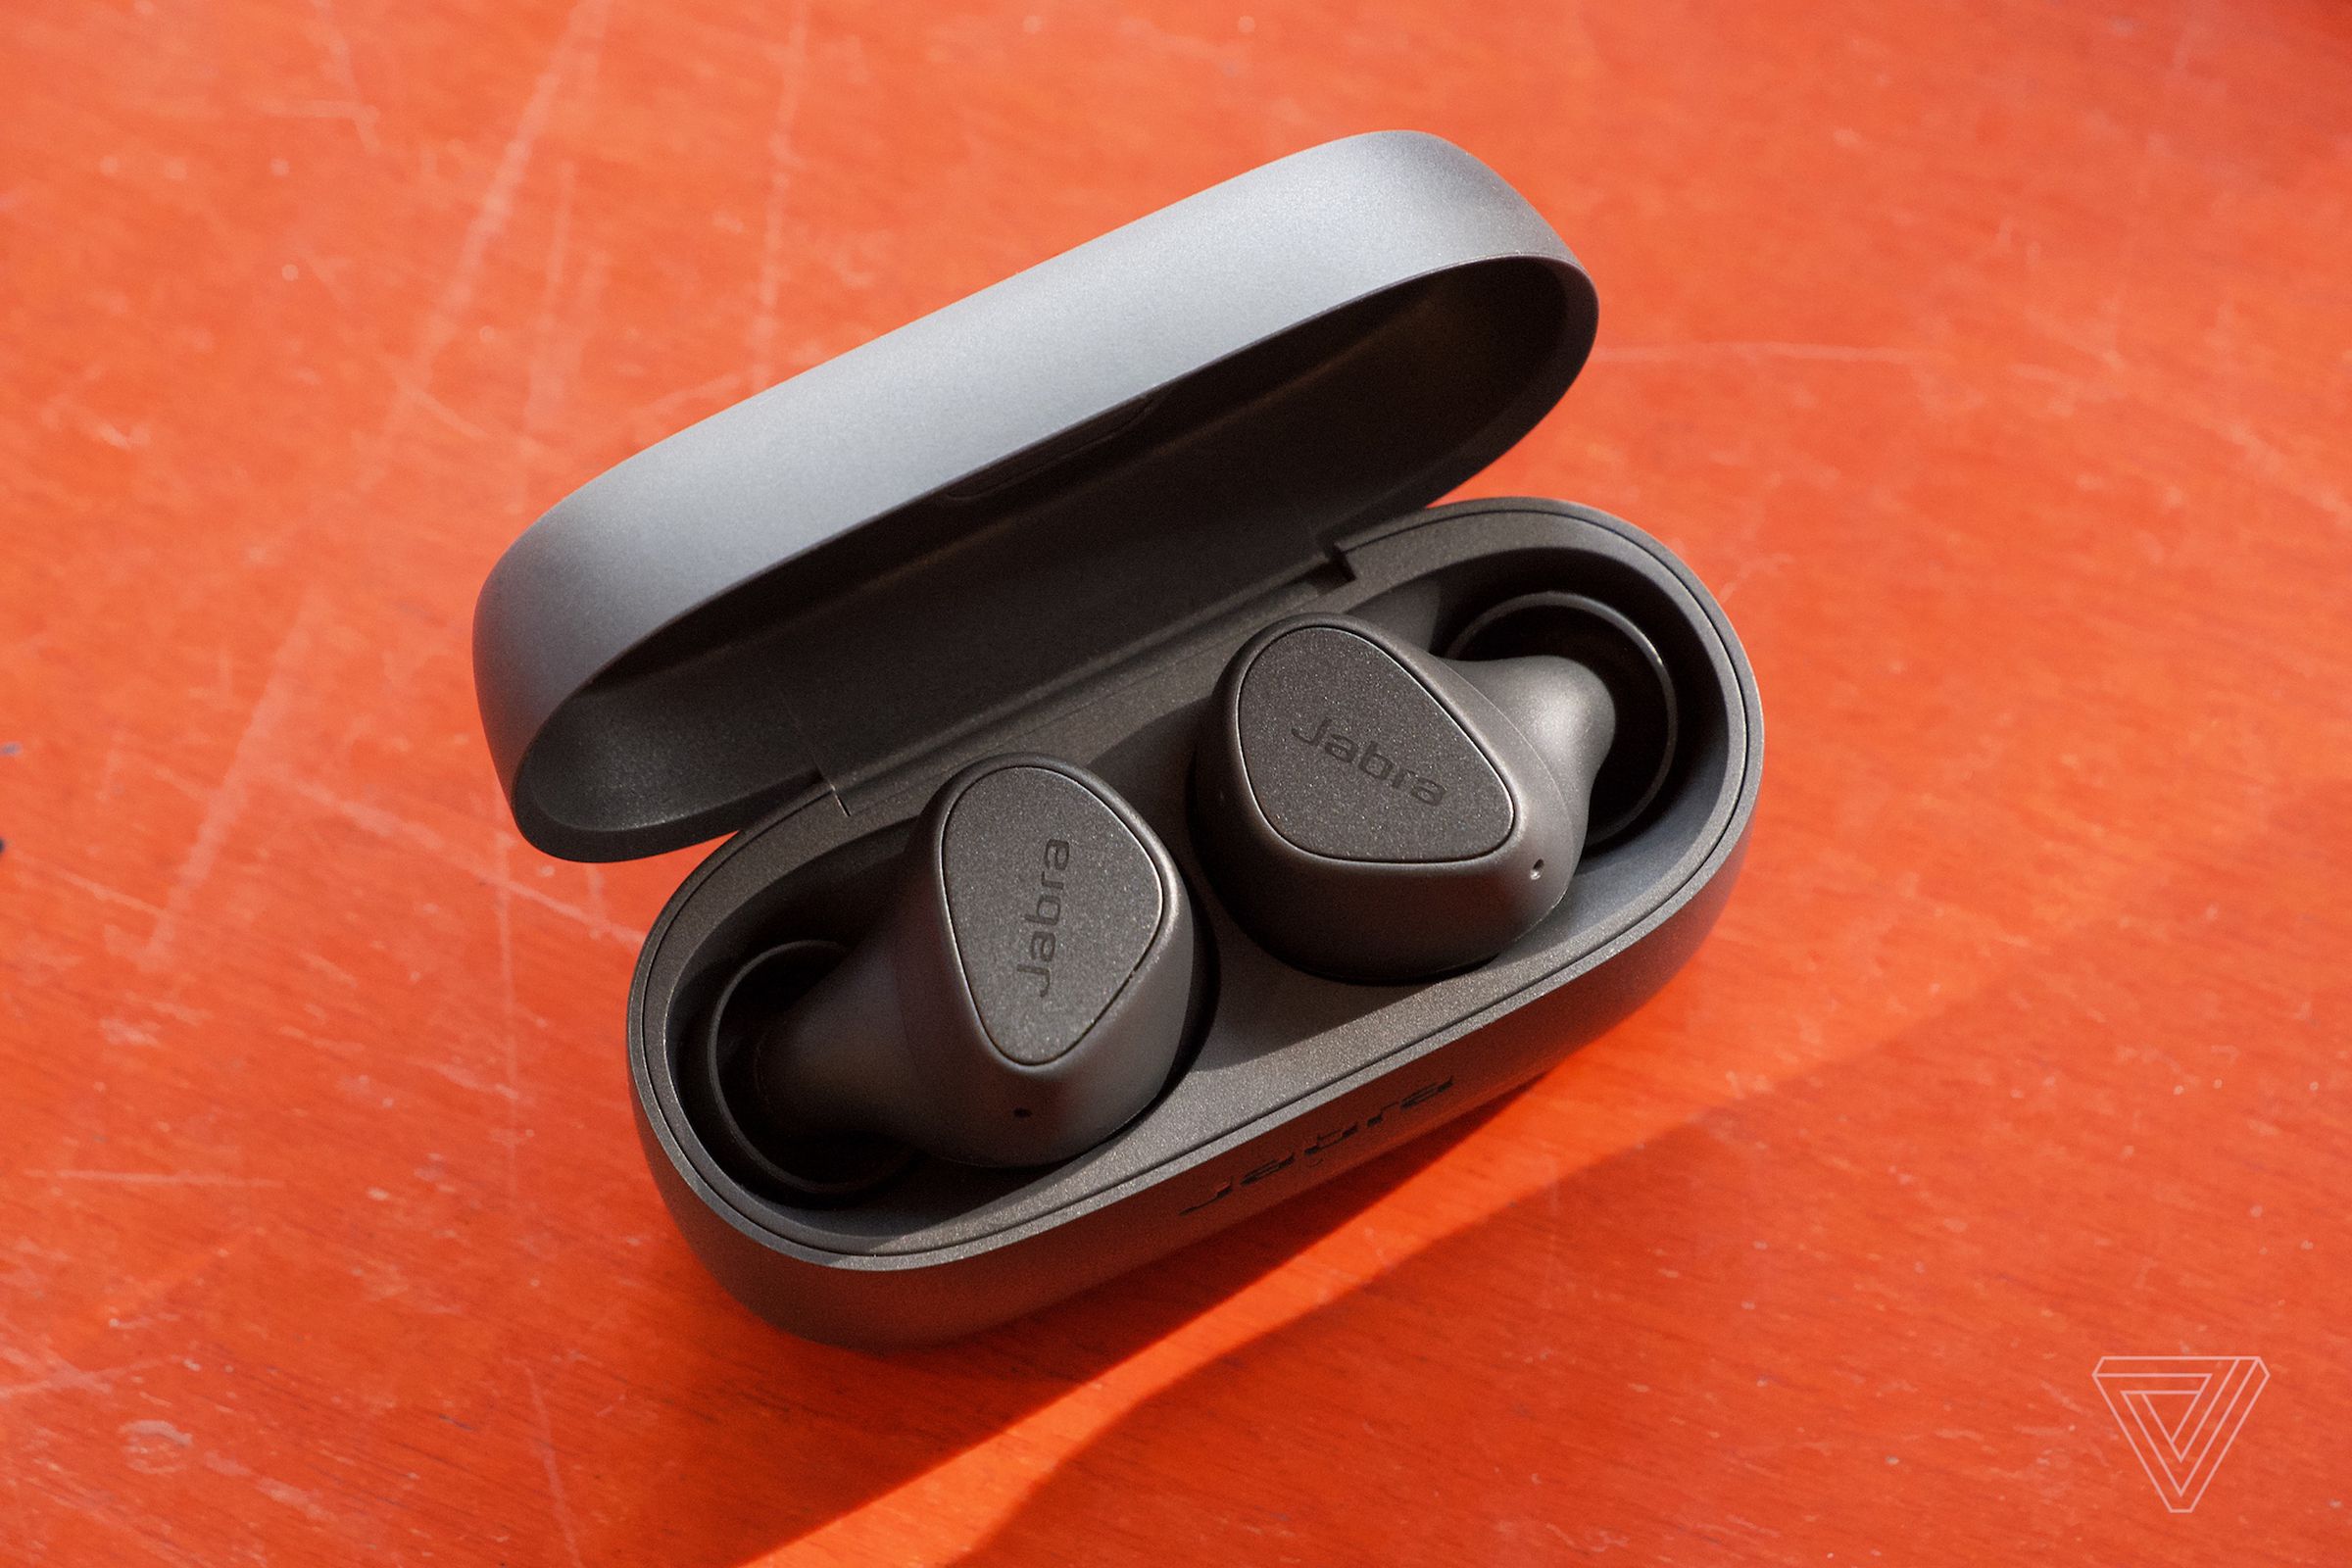 Yes, you can get a quality pair of wireless earbuds for under $50 right now.